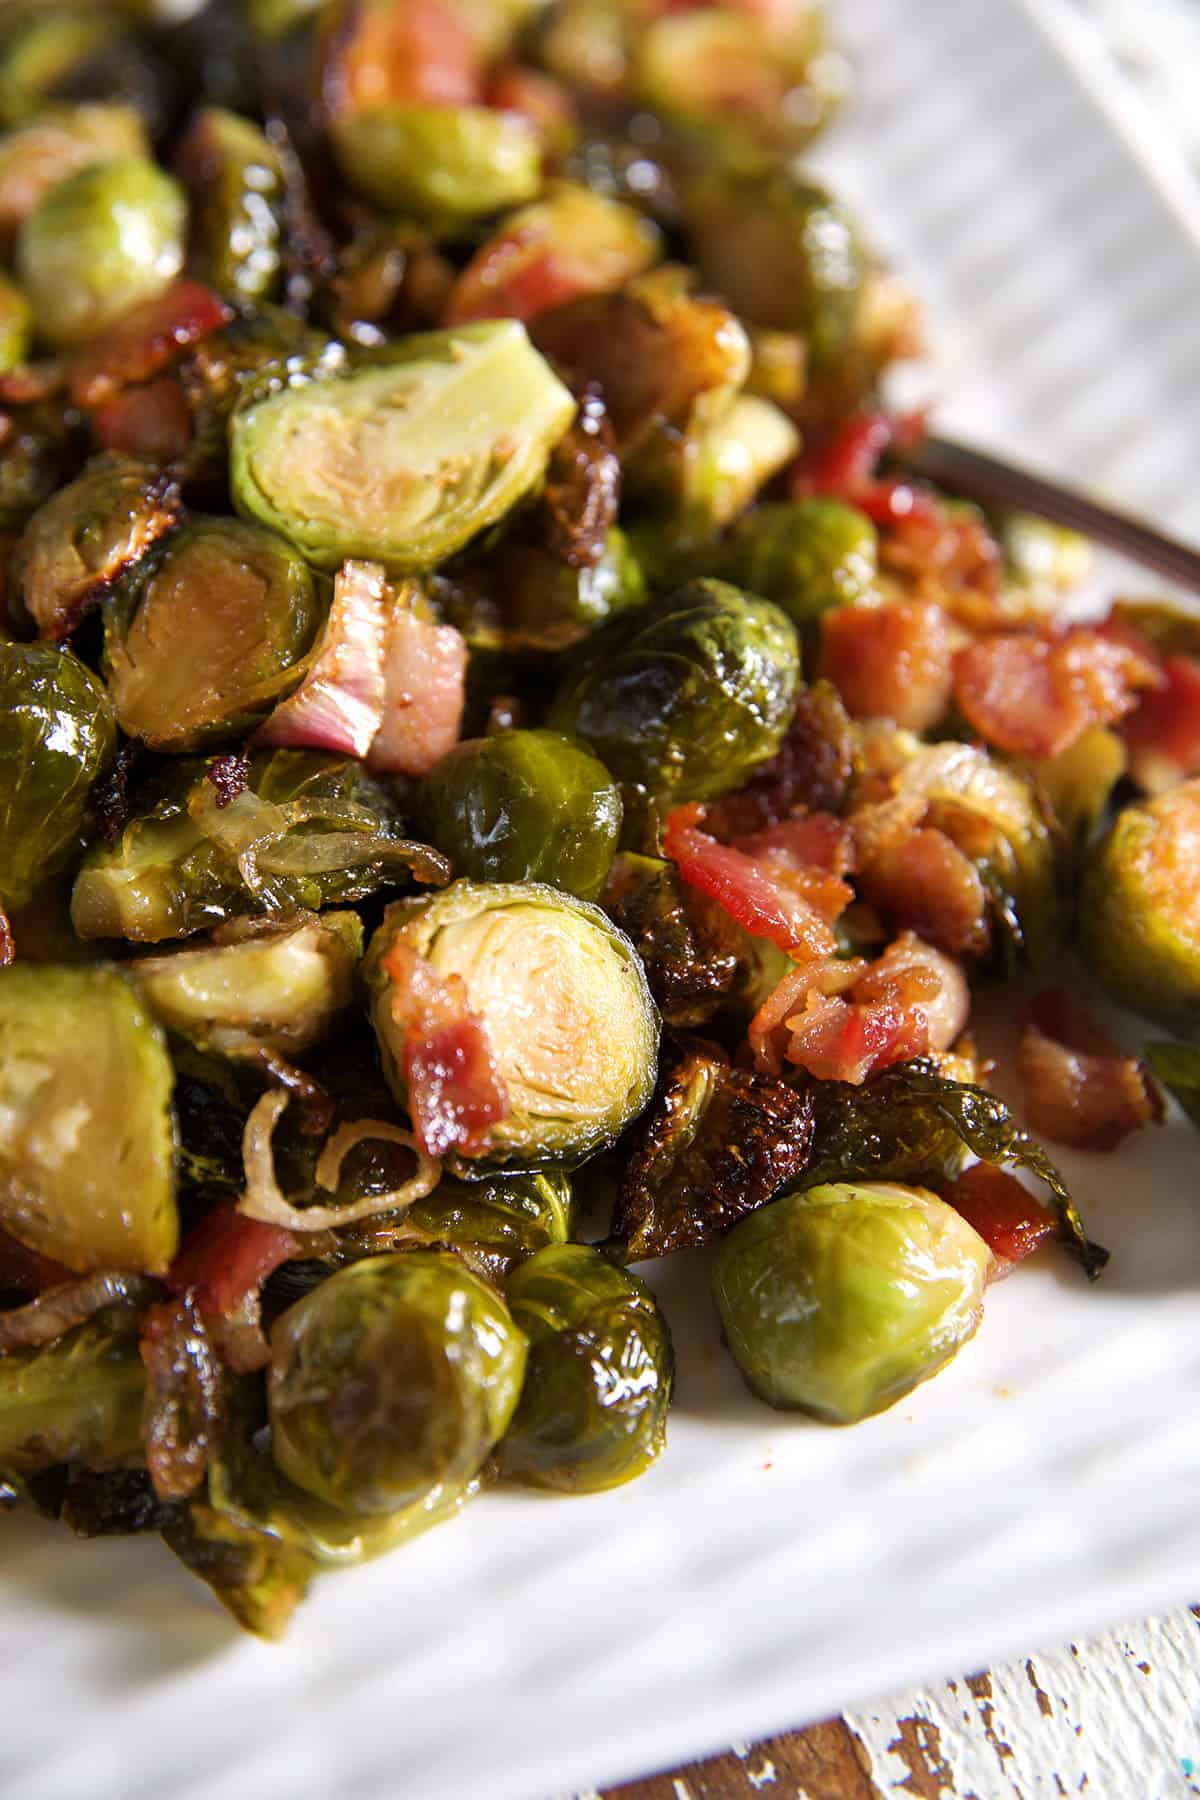 Bacon and brussel sprouts are on a white serving tray.